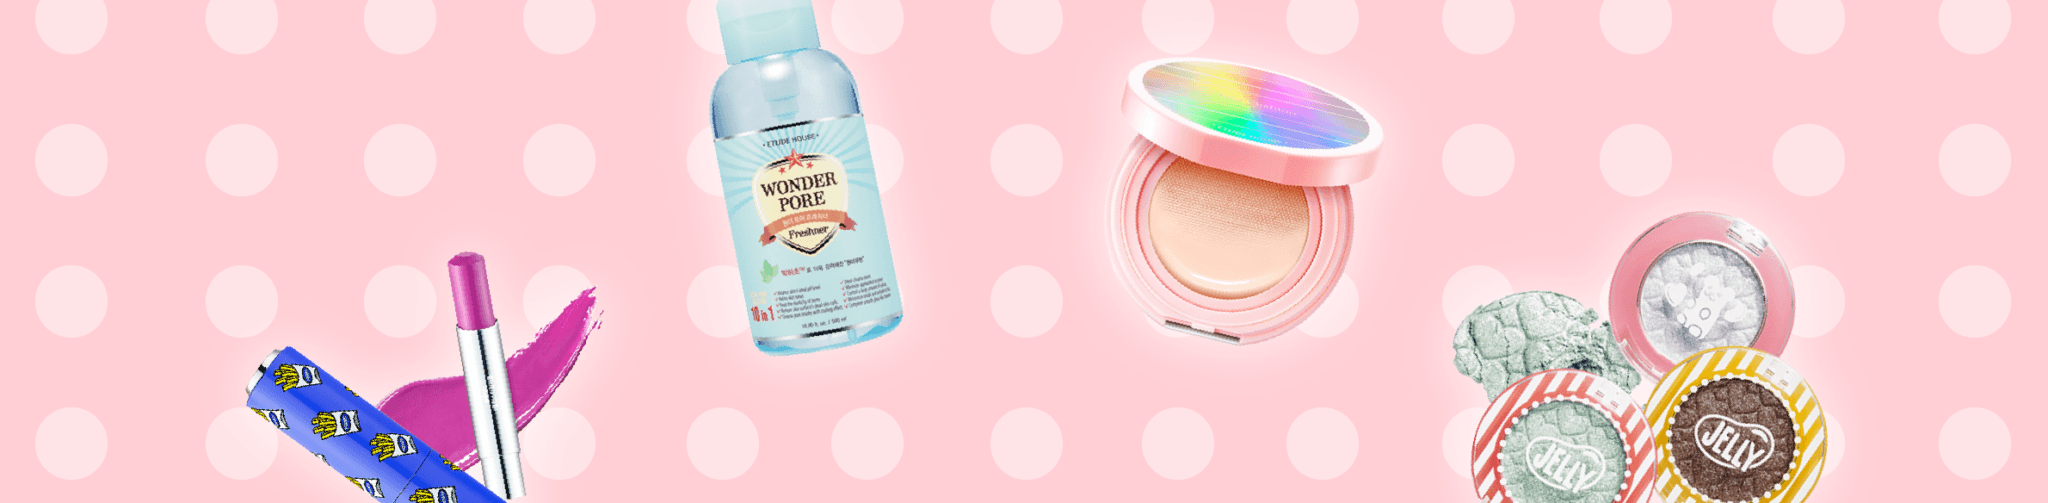 Treat Yourself to Etude House: 10 Under $10